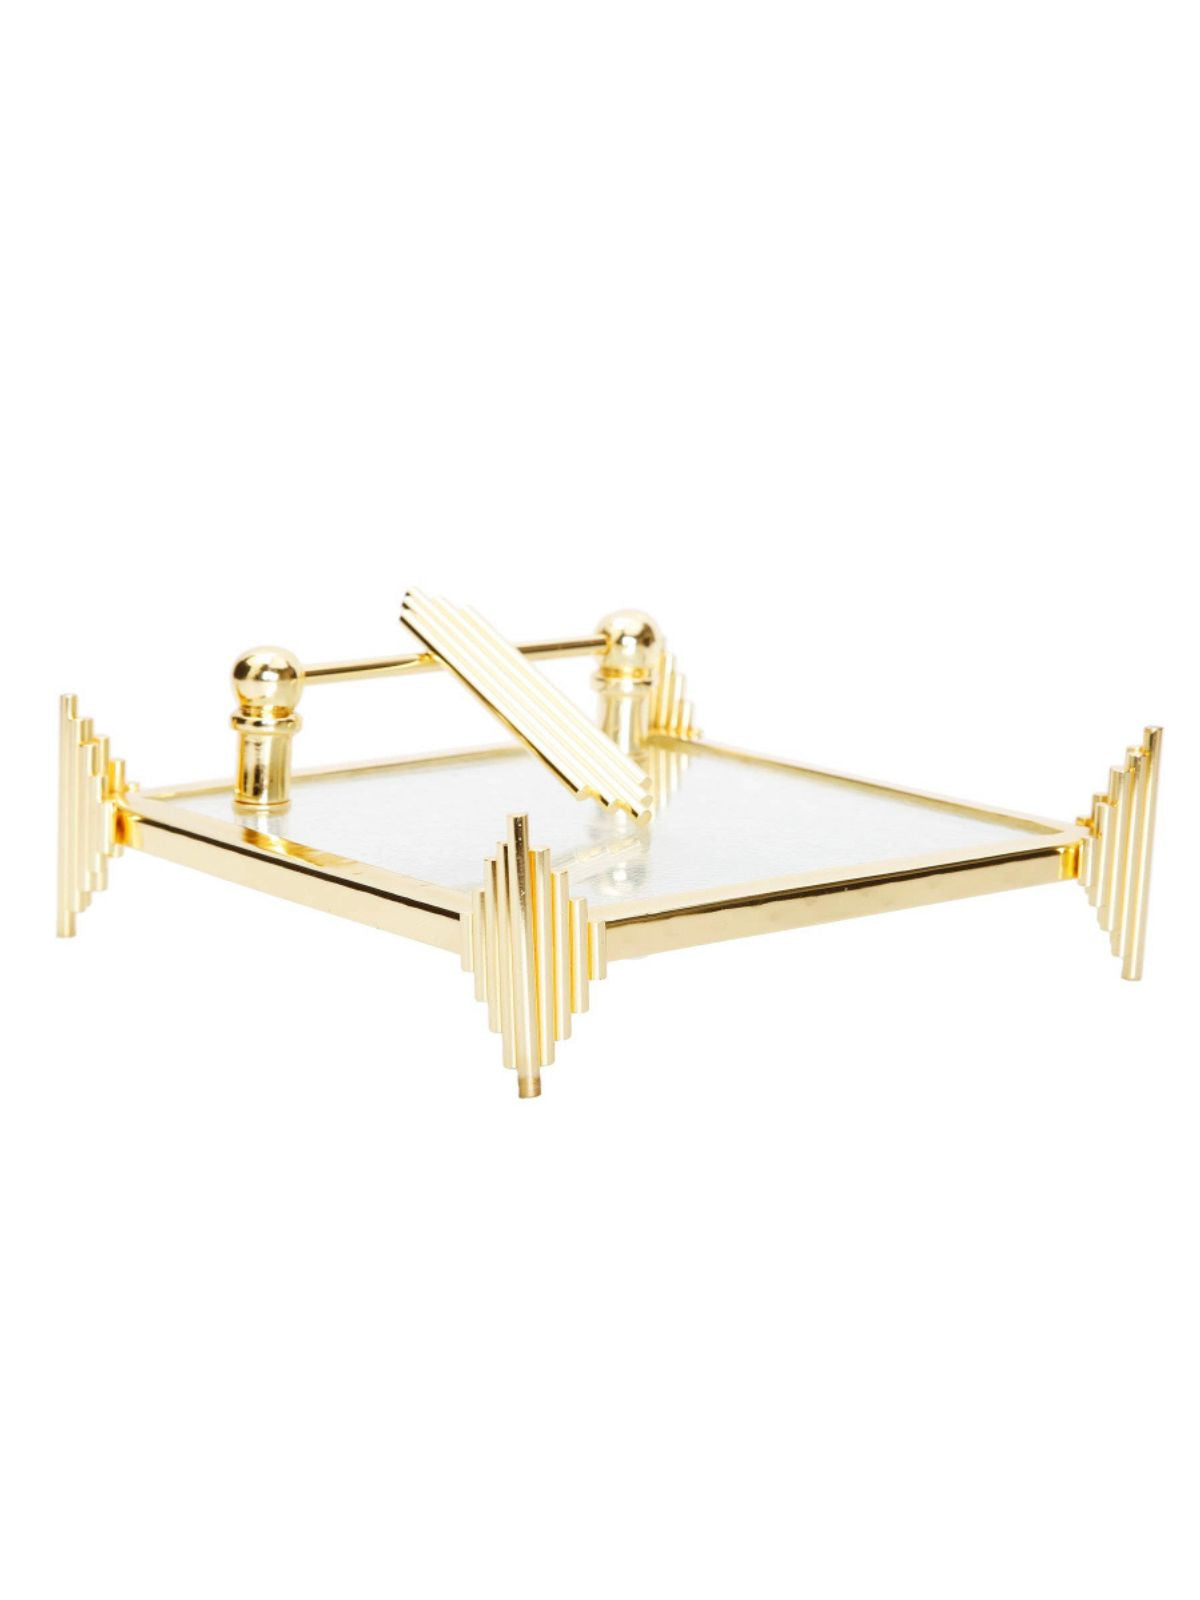 Stainless steel and glass napkin holder with symmetrical lines and lustrous gold color. Has weighted tongue that keeps napkins neatly in place.